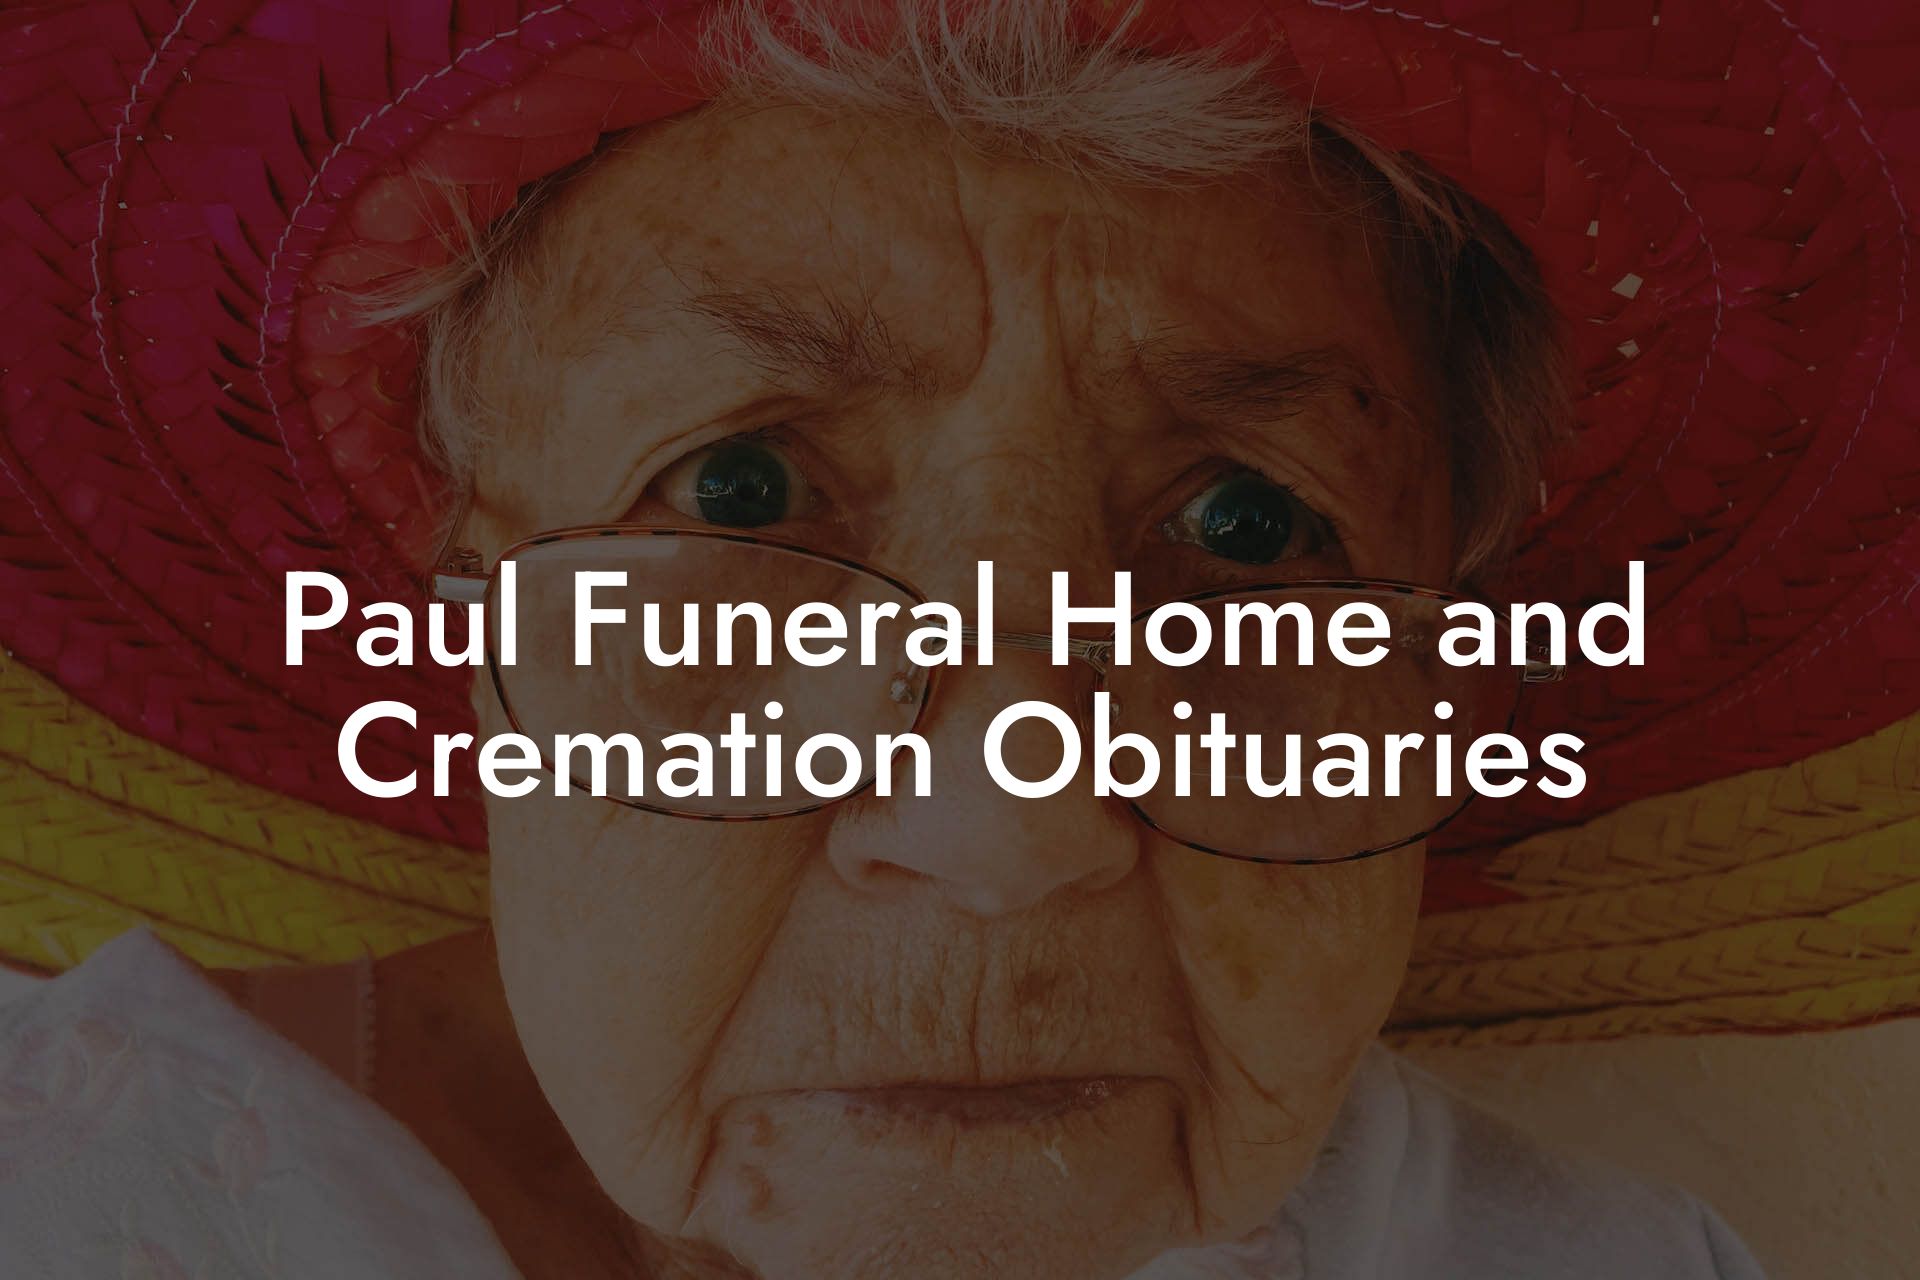 Paul Funeral Home and Cremation Obituaries